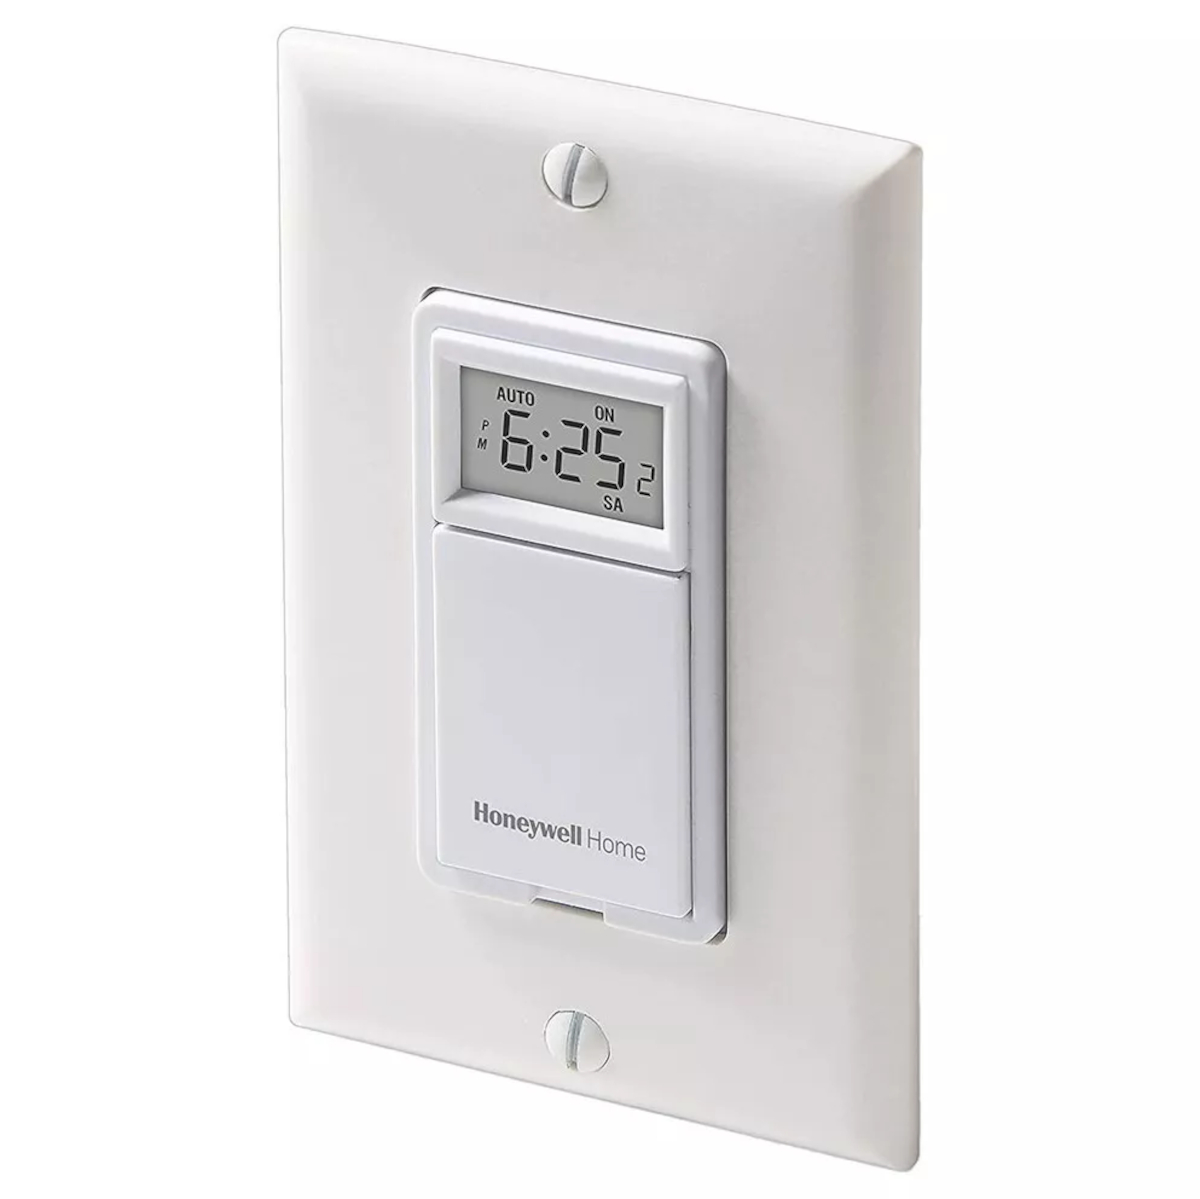 HONEYWELL Light Switch, 7 Day, Programmable, White - image 1 of 4